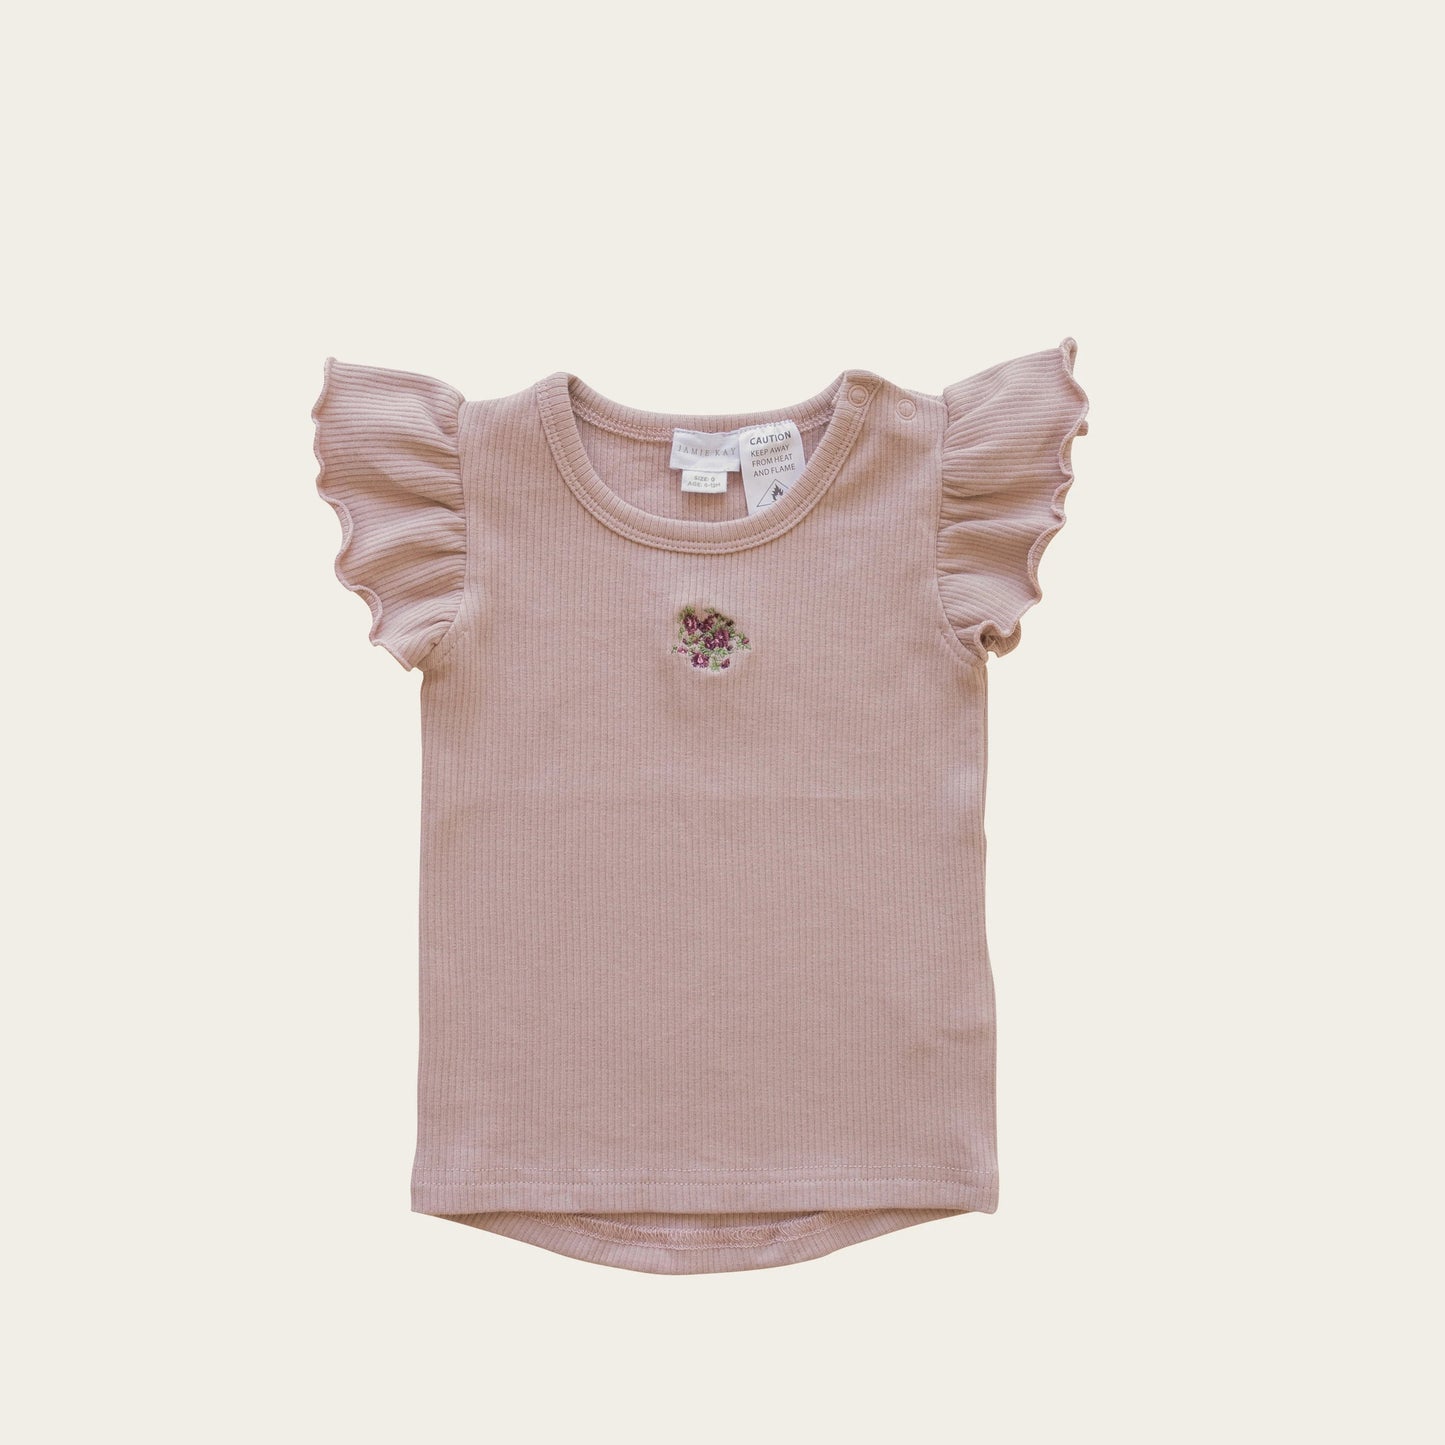 Rose Grey Embroidered Knitting Baby Kids Clothing